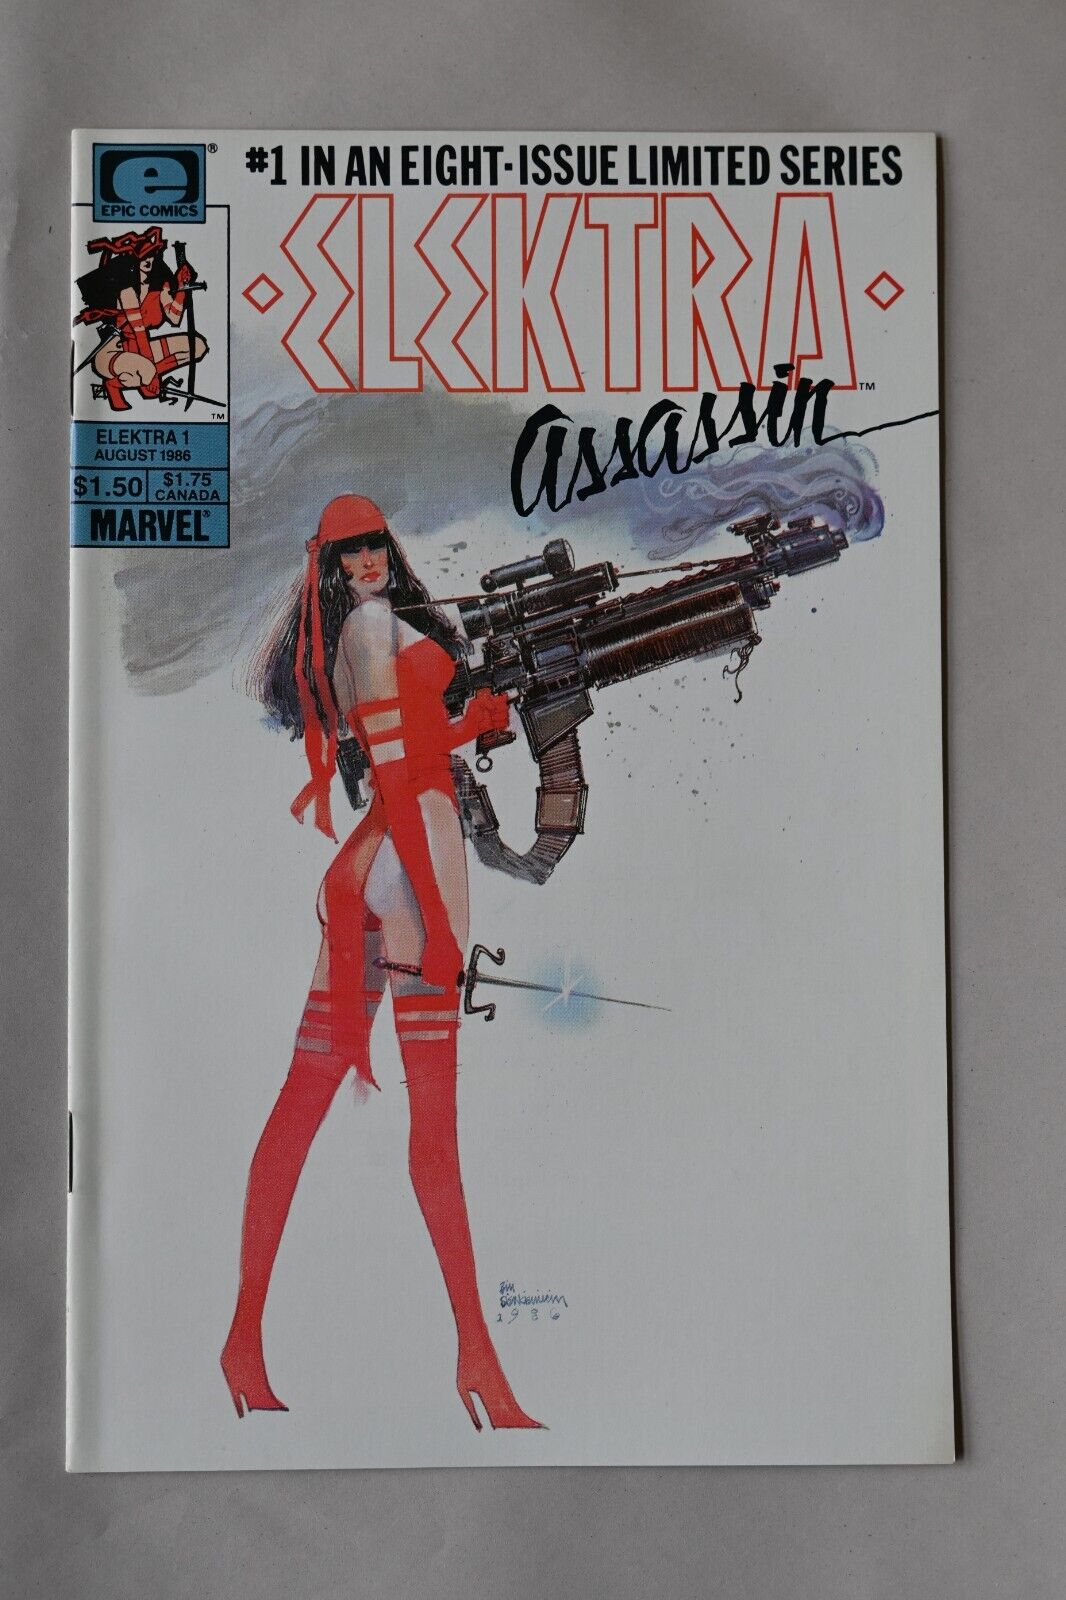 ELECTRA ASSASSIN #1 FIRST ISSUE COMIC BOOK AUGUST 1986 Very Good